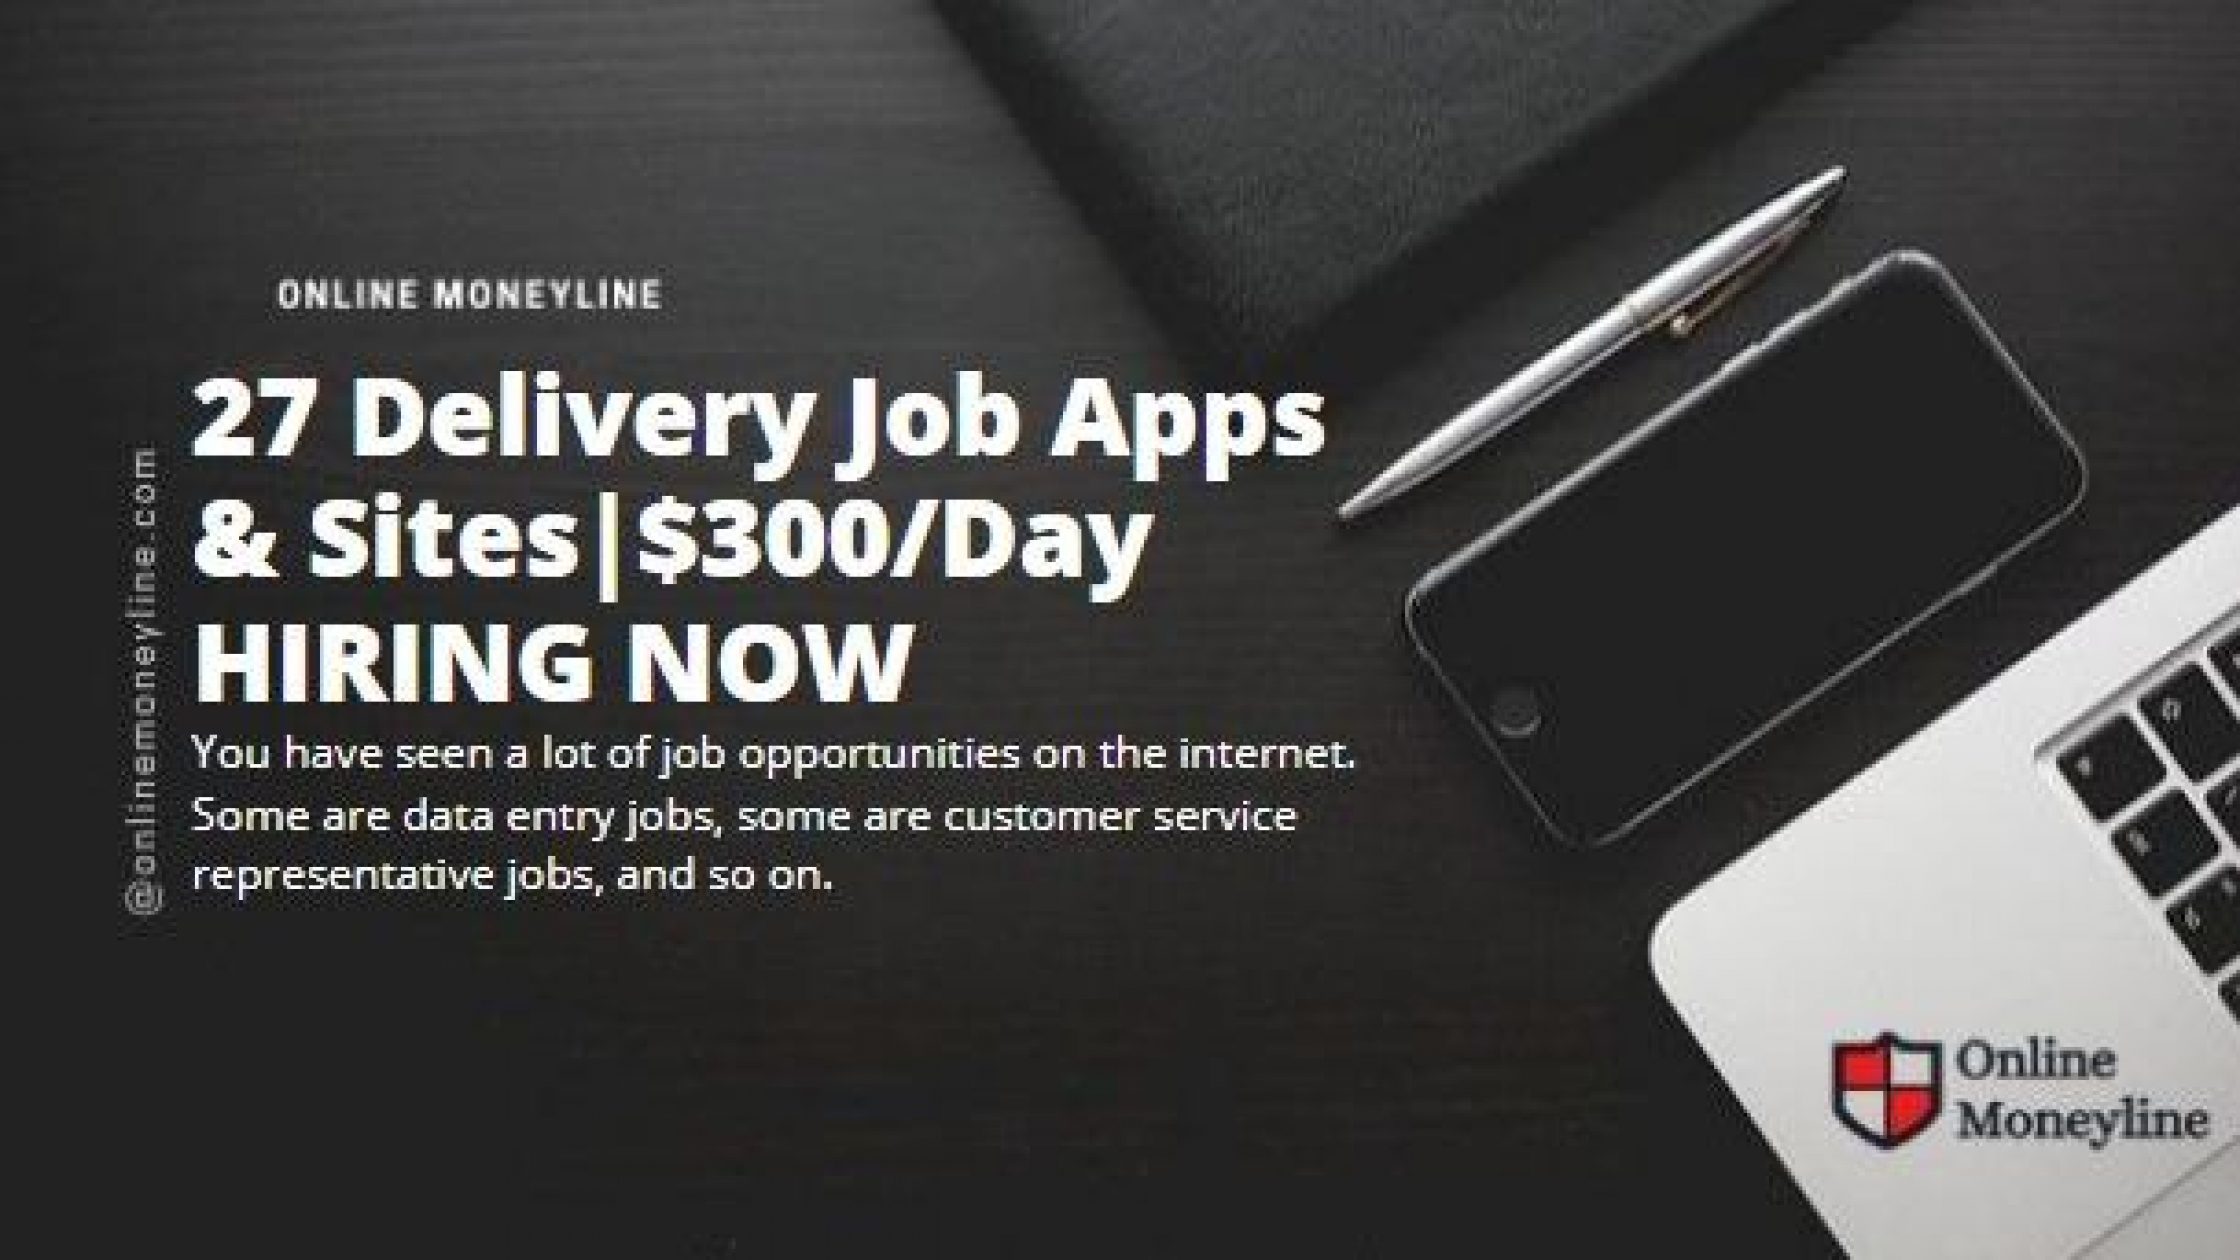 27 Delivery Job Apps & Sites|$300/Day HIRING NOW